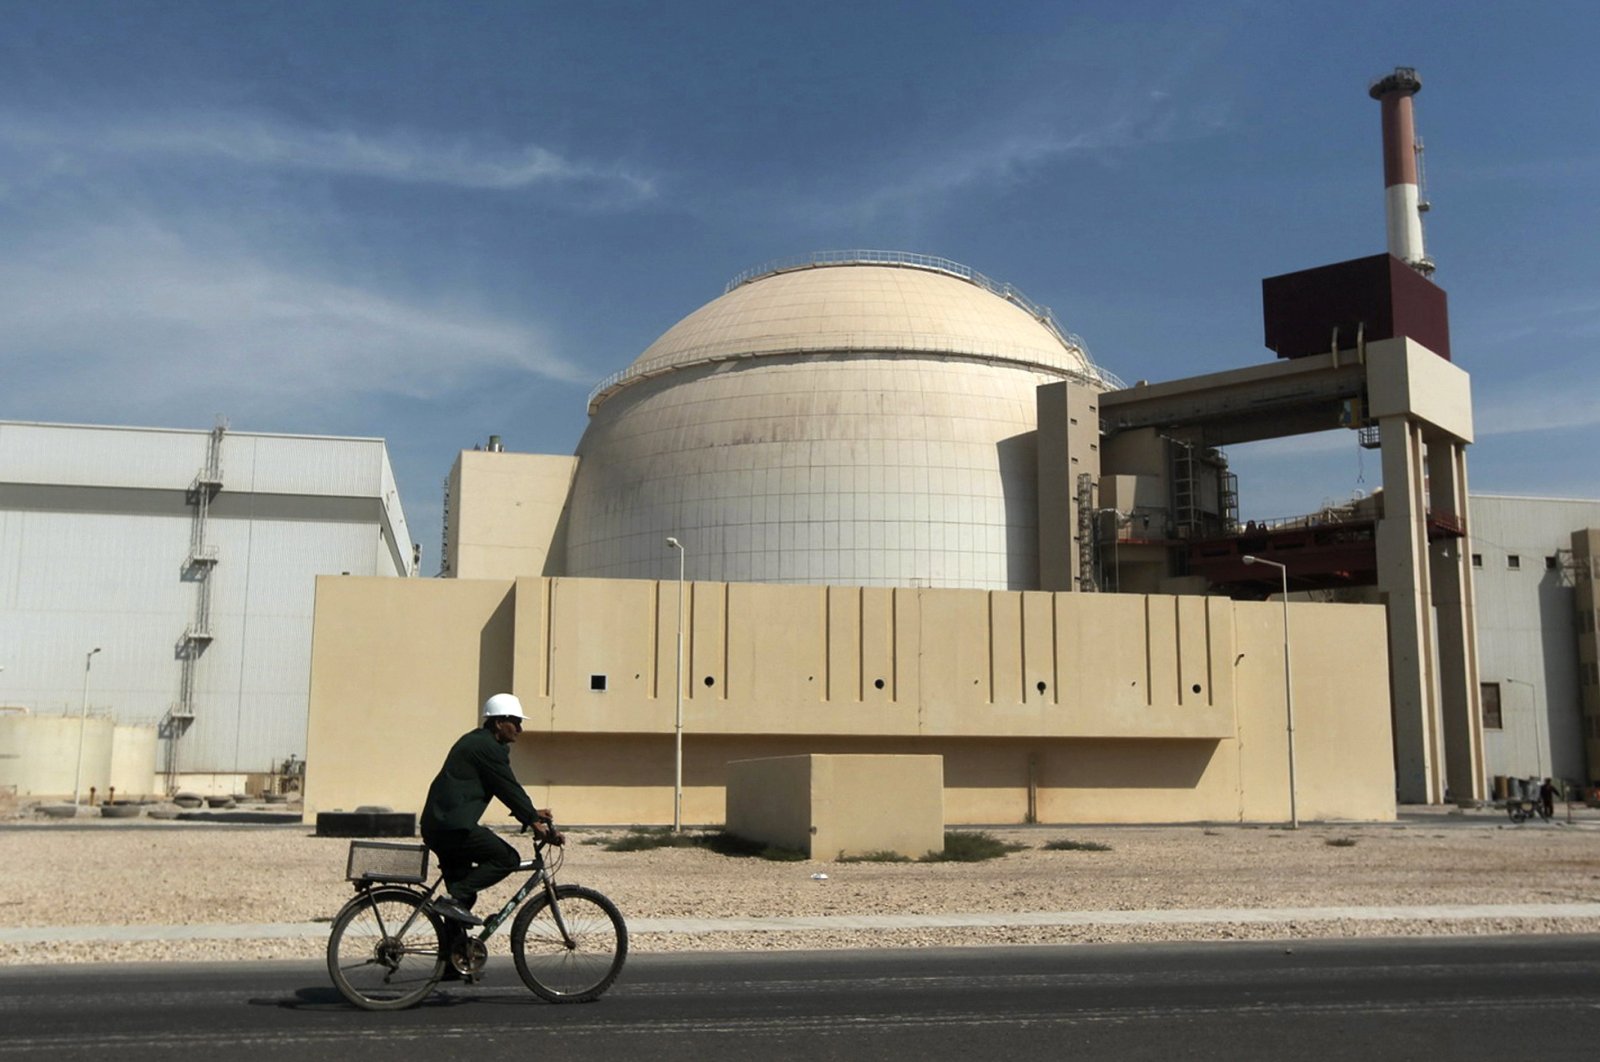 A worker rides a bicycle in front of the reactor building of the Bushehr nuclear power plant, just outside the southern city of Bushehr, Iran, Oct. 26, 2010. (AP Photo)